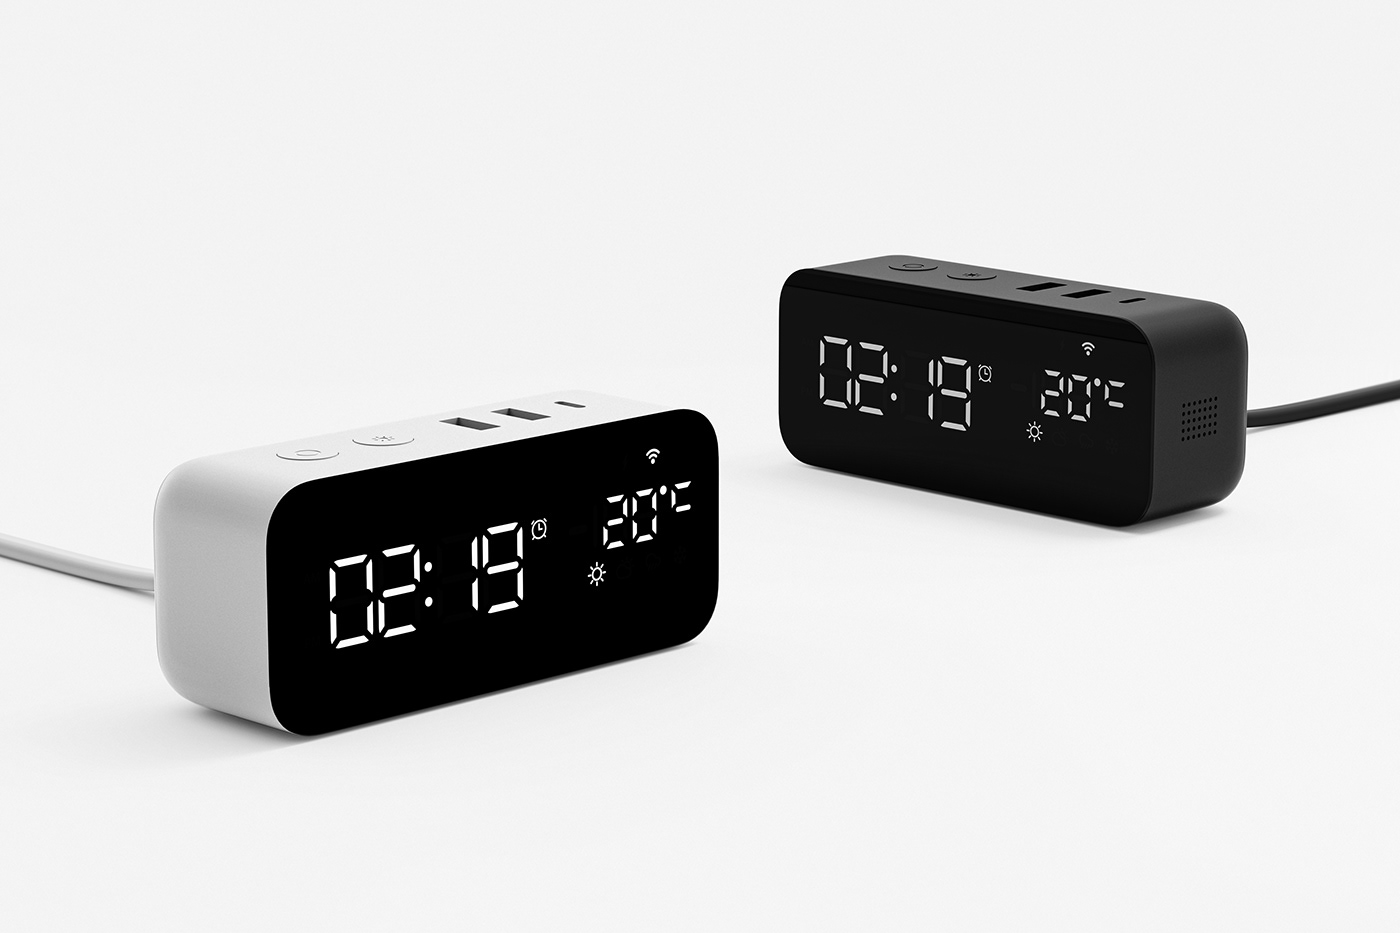 Alarm clock fast charger simple smart clock socket 3 in 1 function Smart Rubik's Cube Clock transparent material black and white